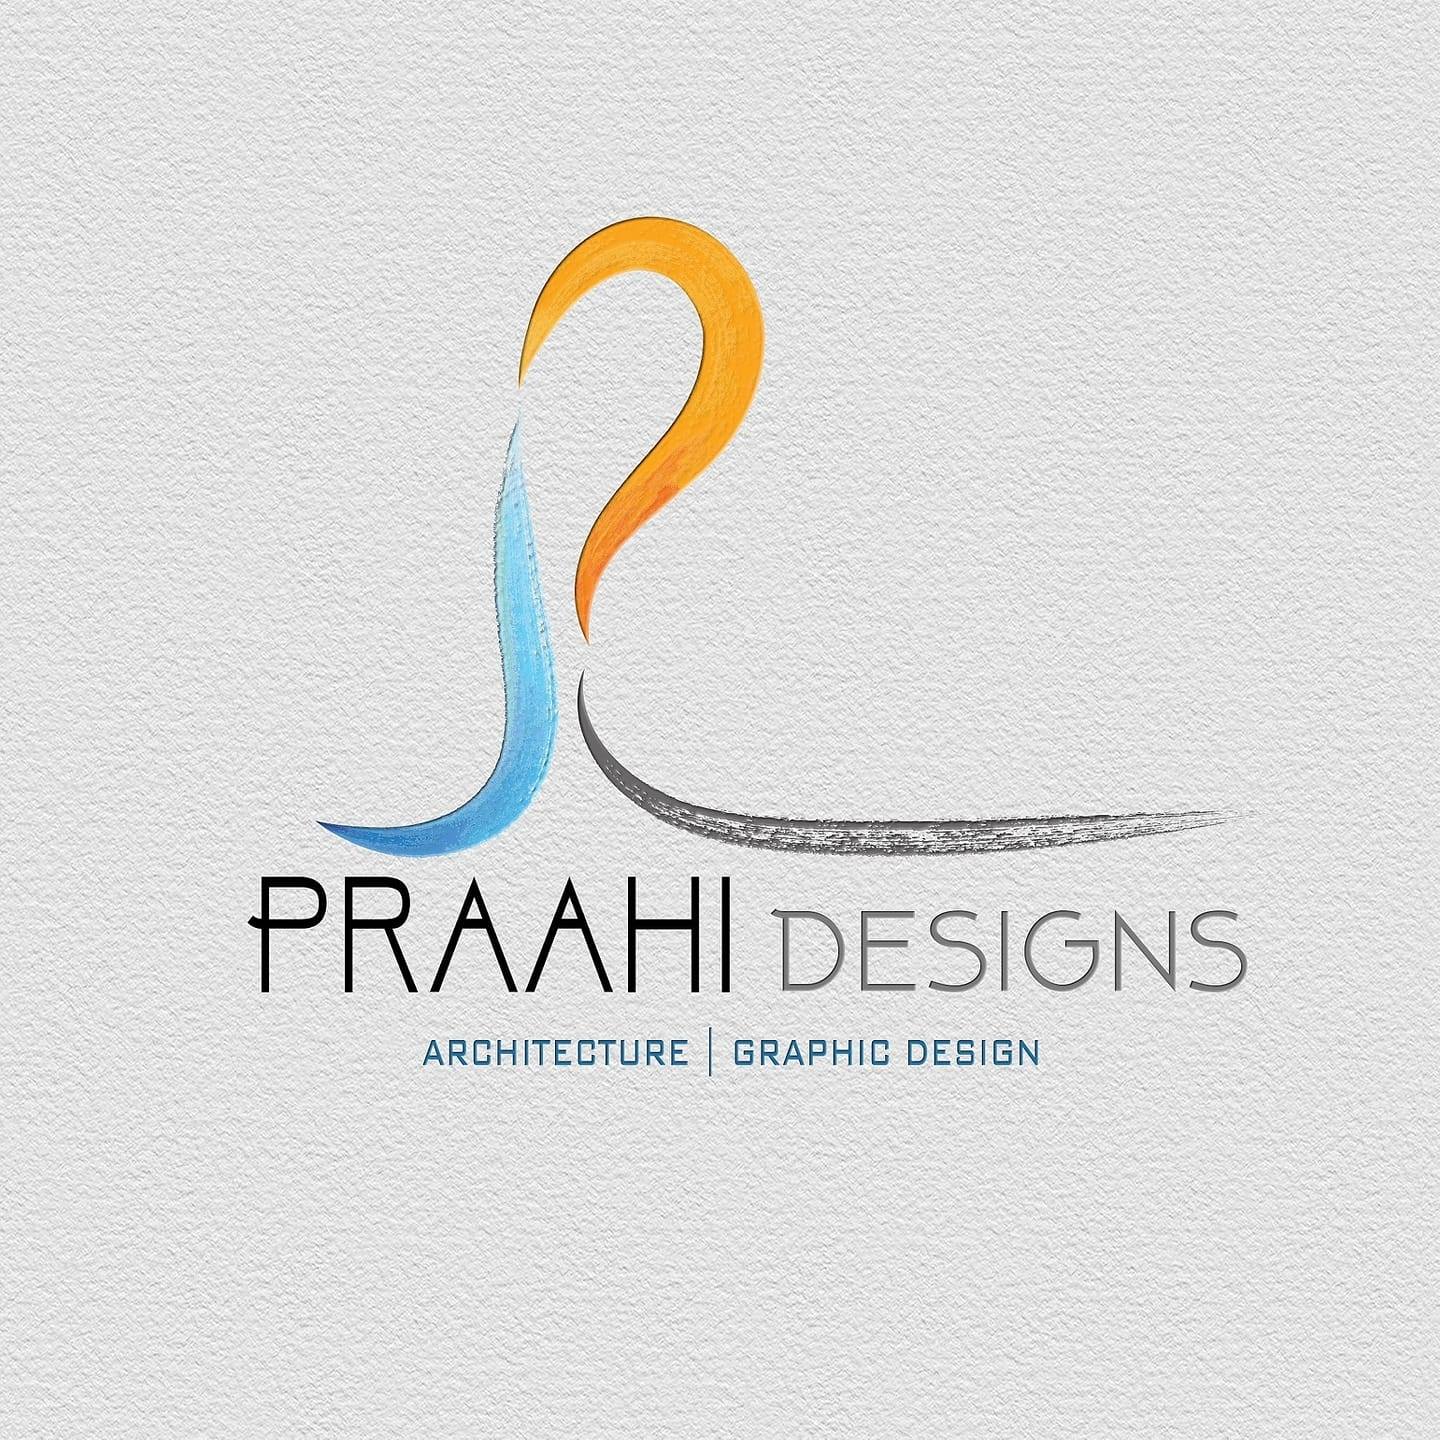 Praahi Designs|IT Services|Professional Services